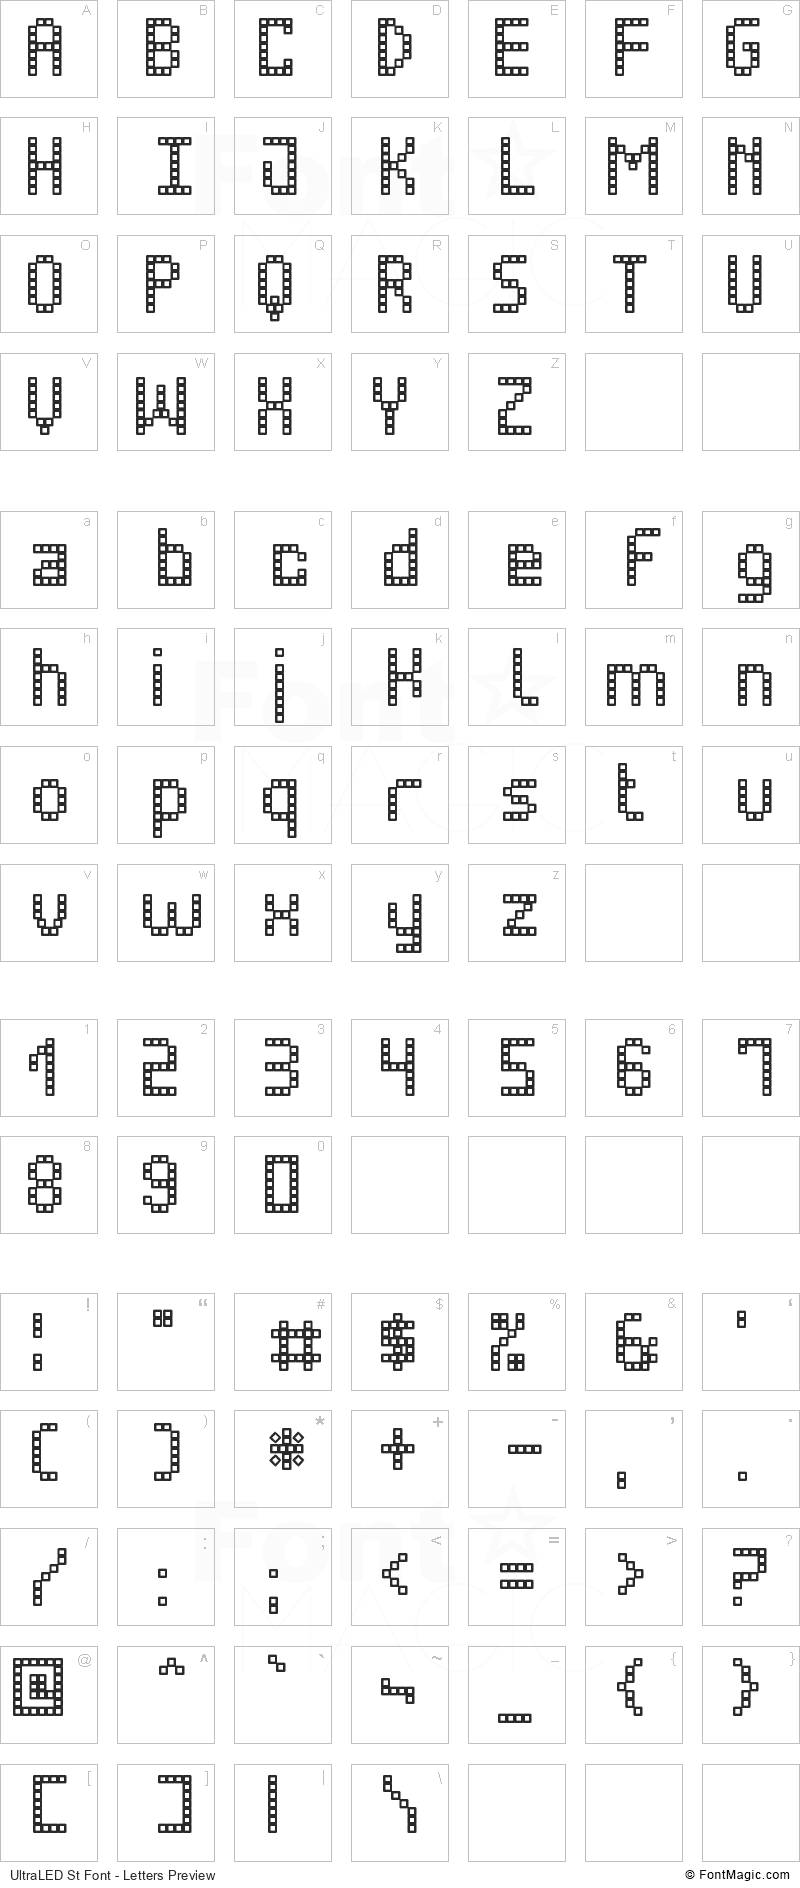 UltraLED St Font - All Latters Preview Chart